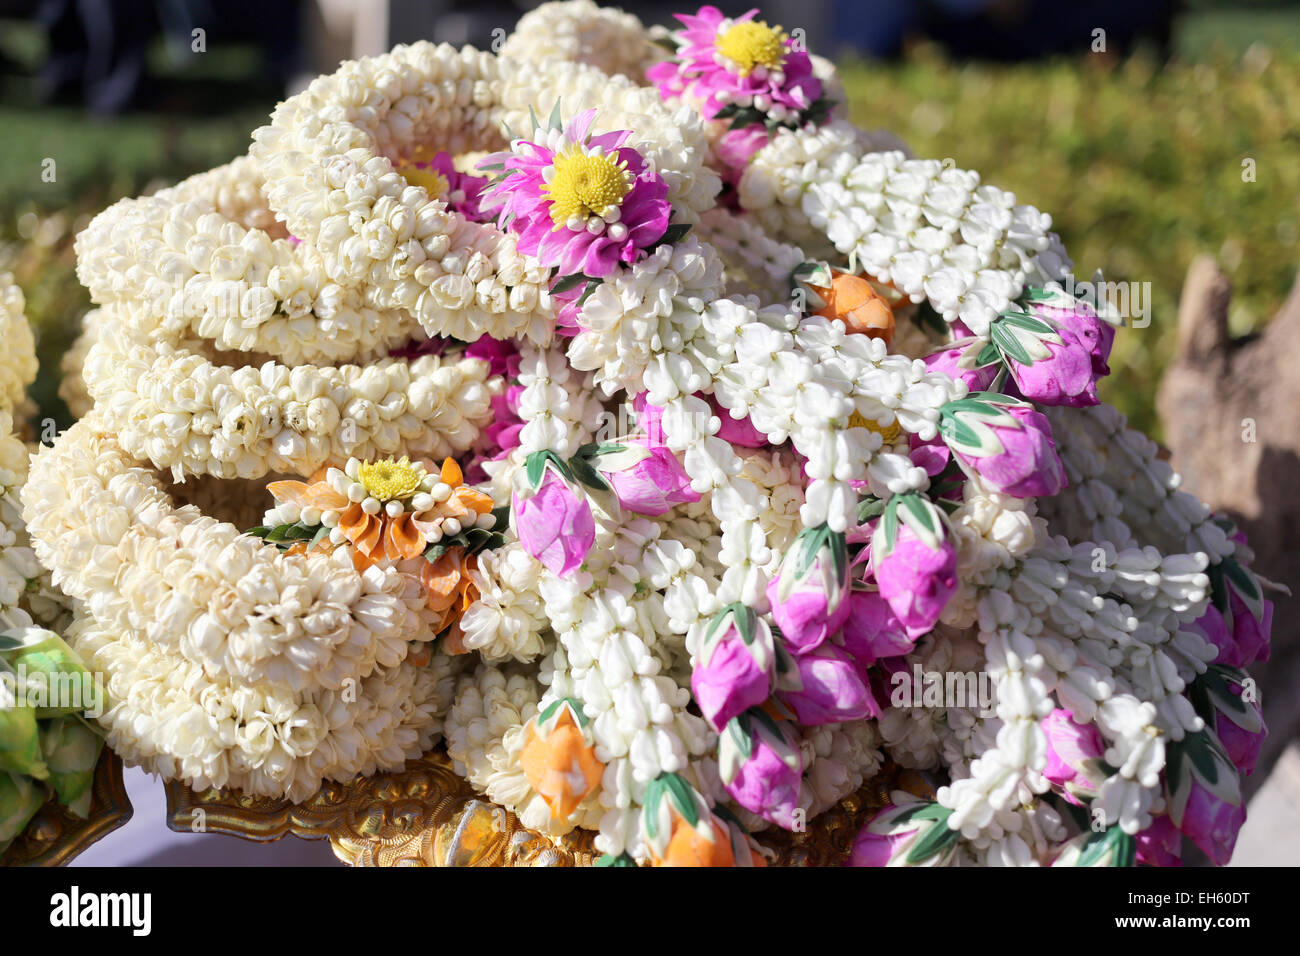 Garland of flowers in utensil for the worship. Stock Photo